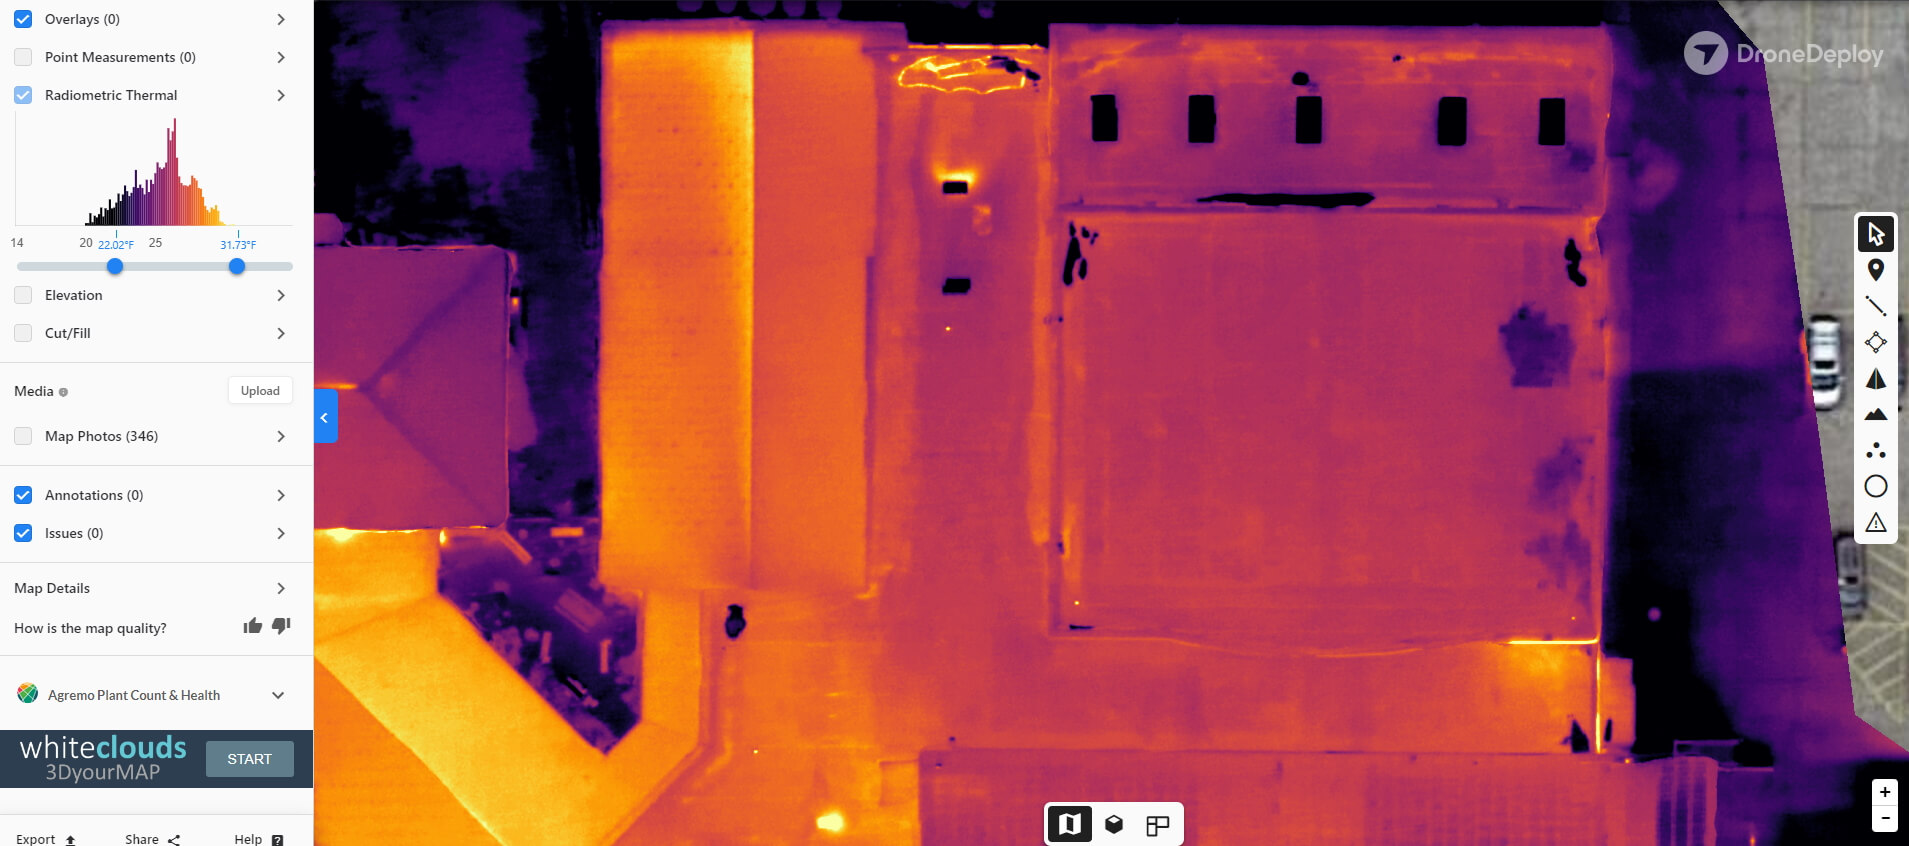 Roof Inspection Workflow 13 - DroneDeploy Thermal